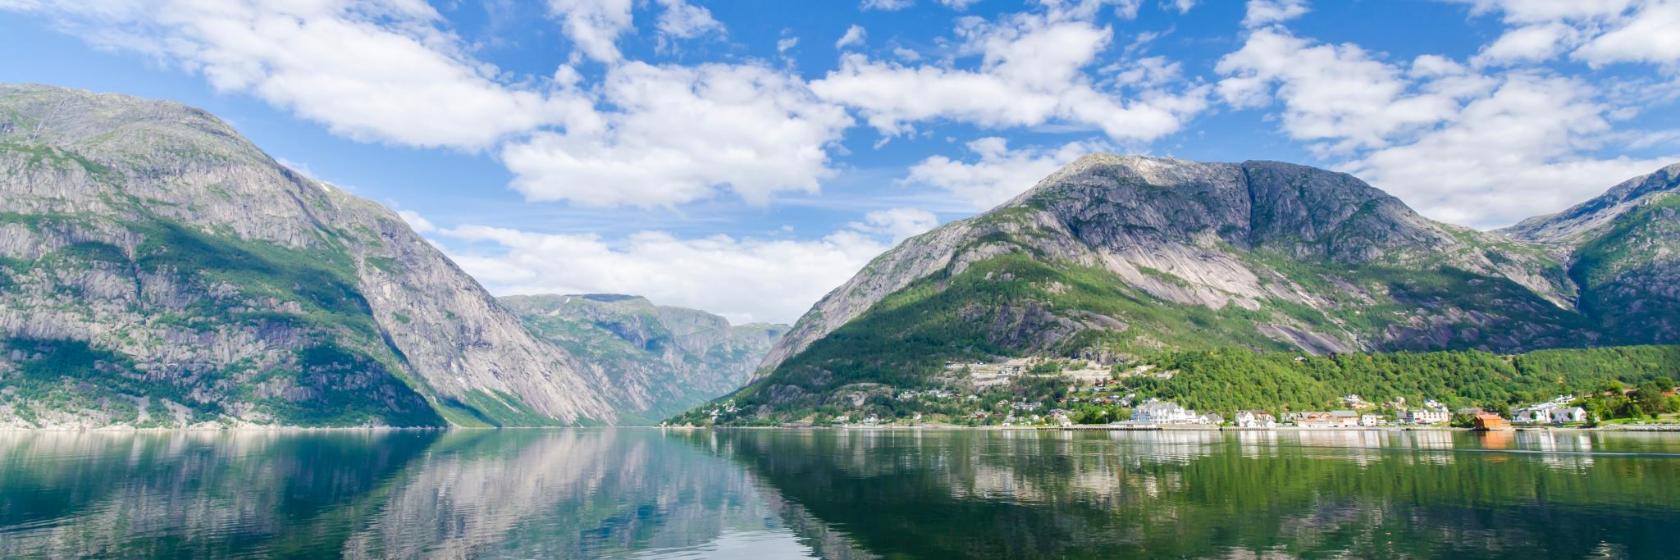 The 10 Best The Hardangerfjord Hotels — Where To Stay in The Hardangerfjord,  Norway